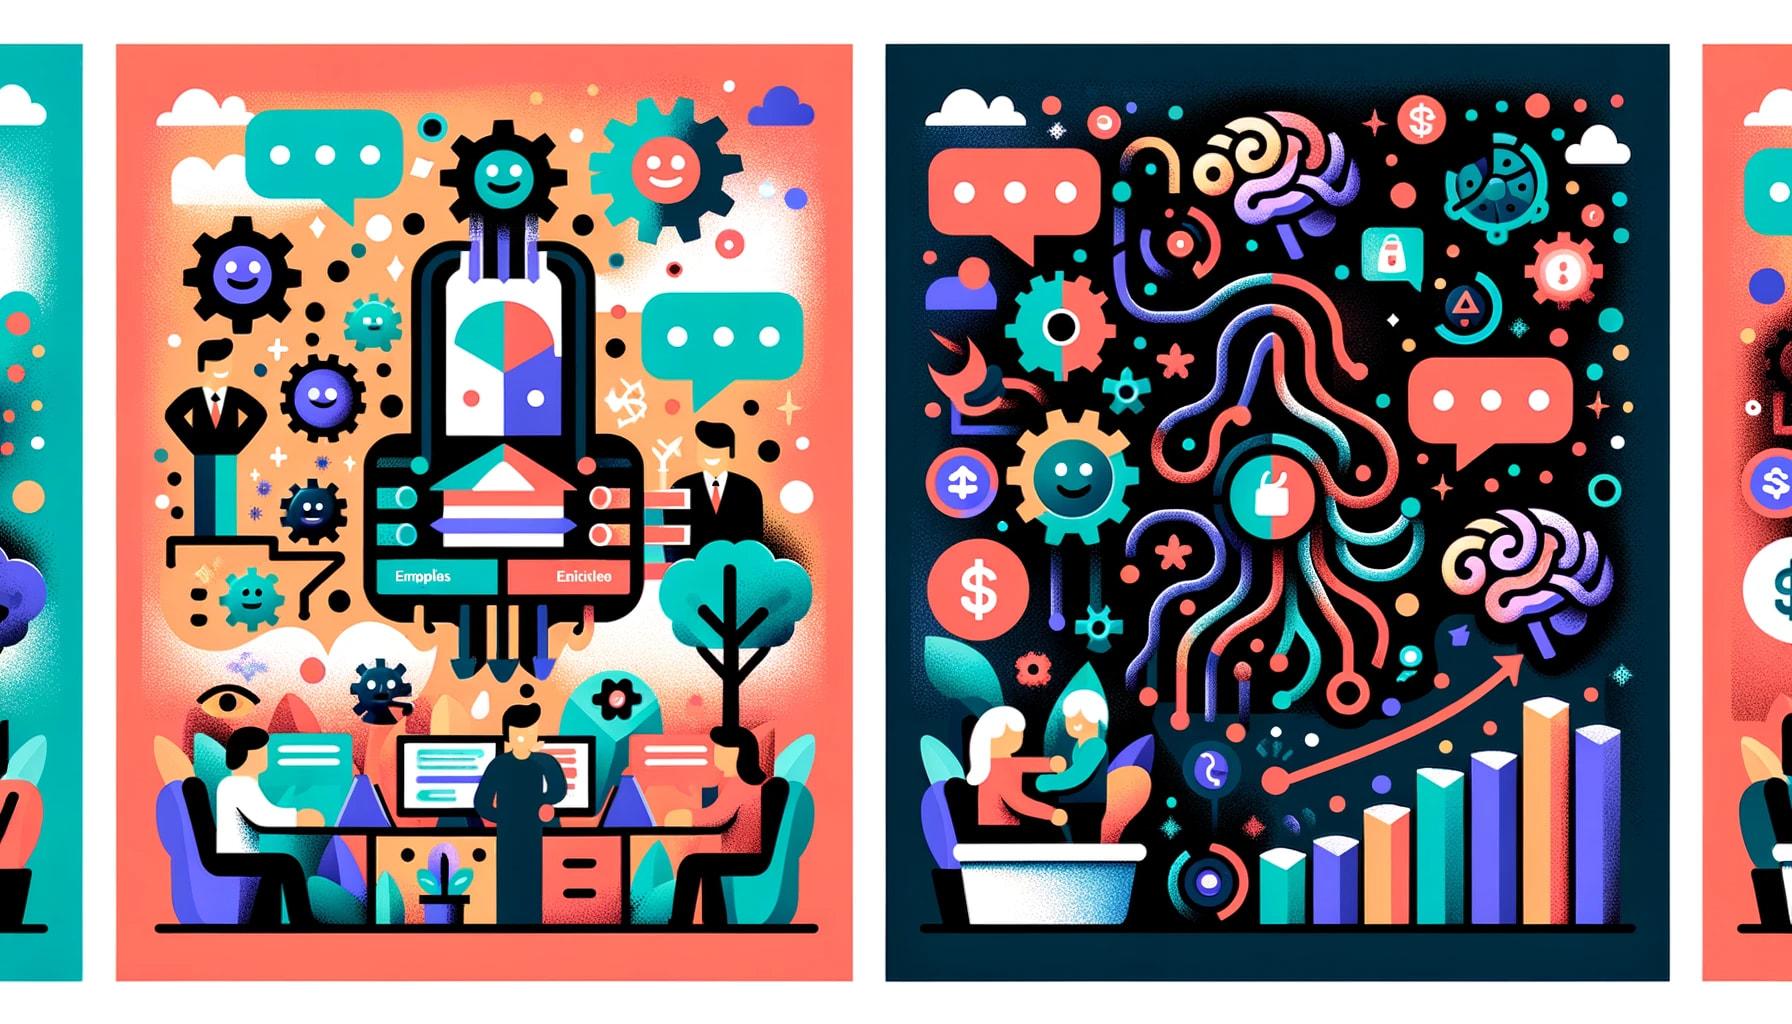 Illustration set in a modern medium enterprise setting. On one end, a vibrant section shows employees and customers benefiting from a conversational AI system, with icons of happy chat bubbles and efficient gears. On the other end, darker shades prevail, with symbols of money being poured into a machine, a firewall barrier, and a twisted neural network representing AI biases, depicting the challenges faced by the enterprise.